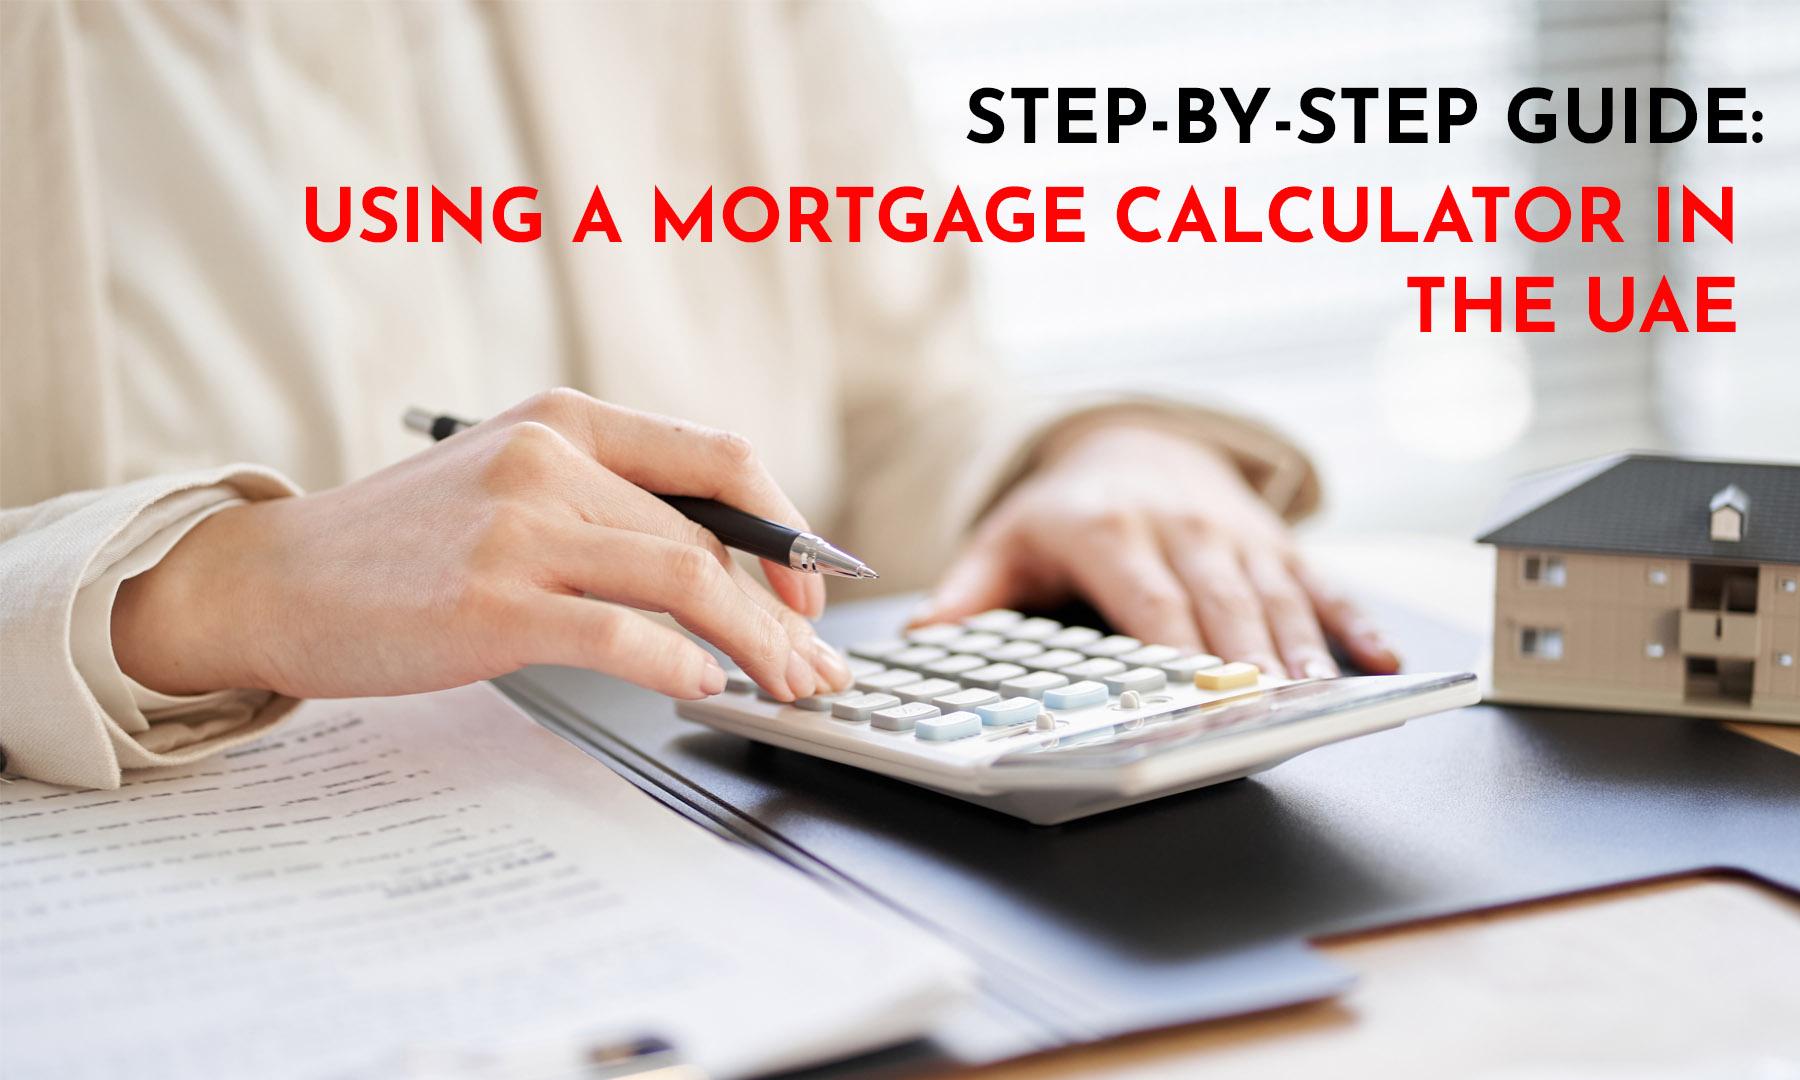 STEP BY STEP GUIDE : USING A MORTGAGE CALCULATOR IN THE UAE